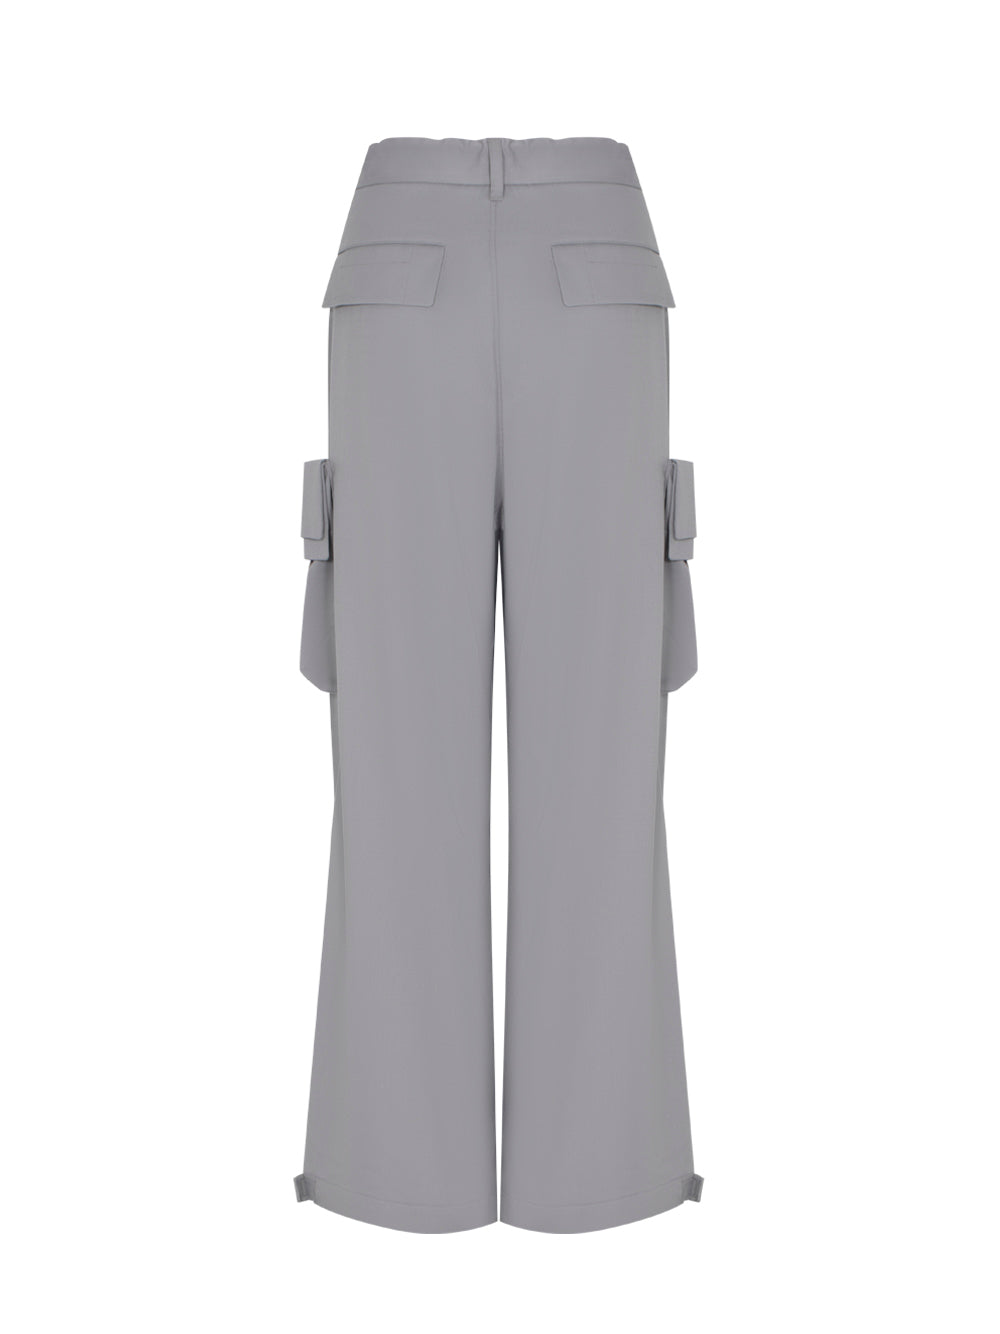 Refined Woven Cargo Pants (CH Solid Grey)